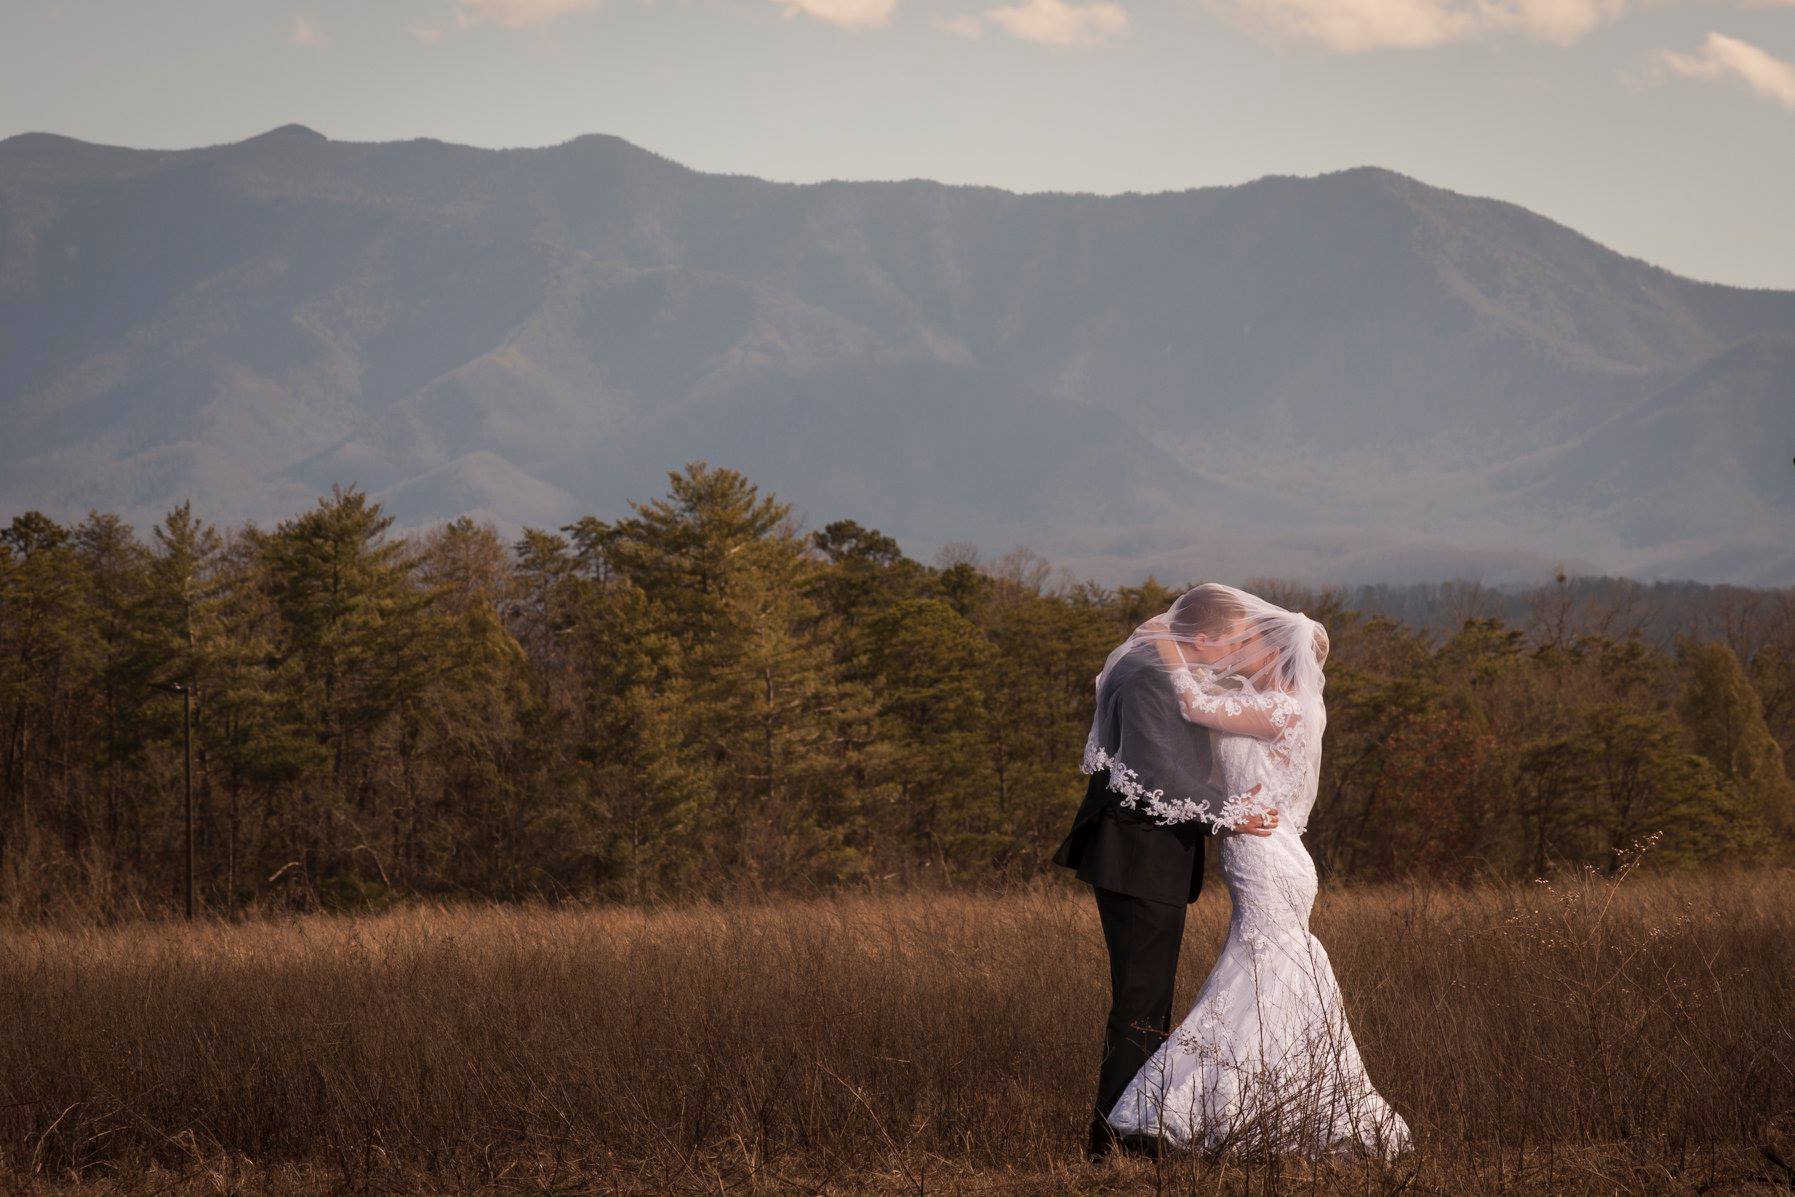 Don Fields Photography in the Smoky Mountains